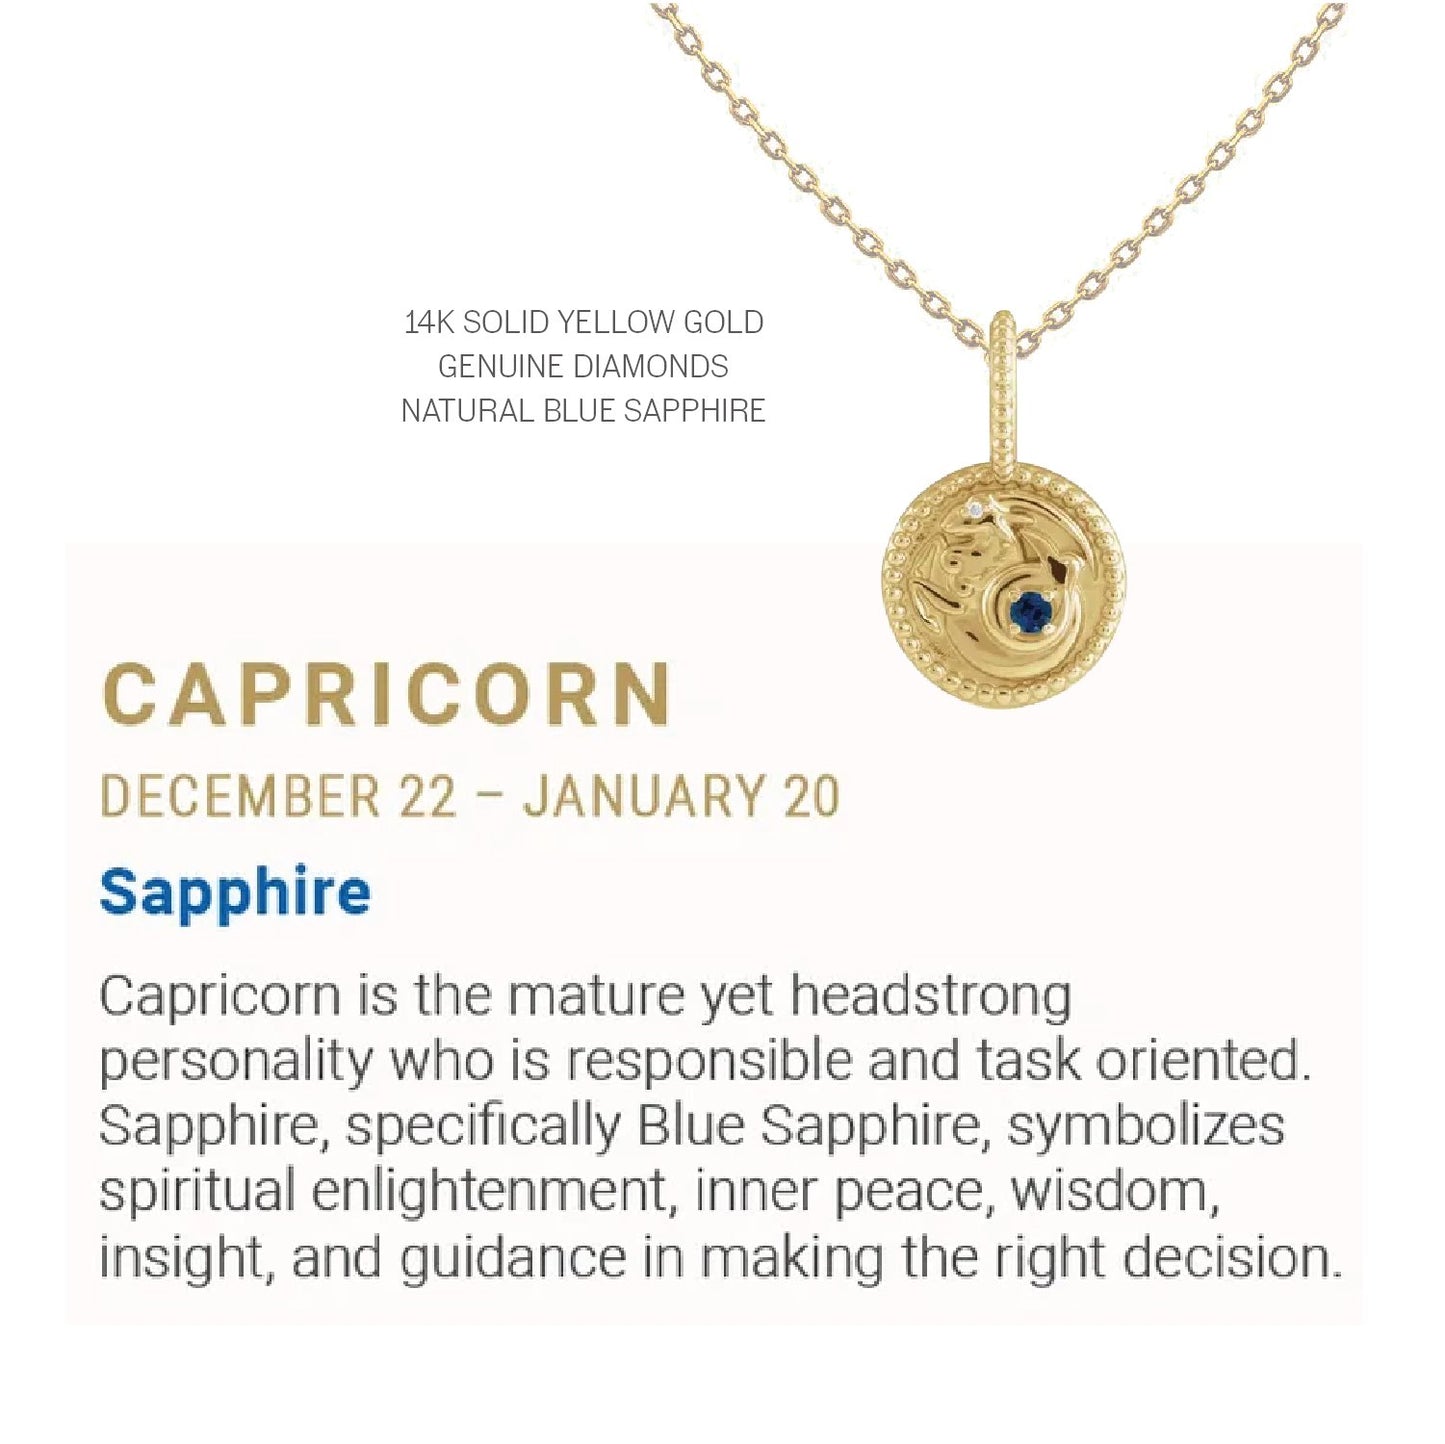 Zodiac Charm Necklace in 14K Gold with Diamonds Necklace Robyn Canady 14K Solid Gold 16" Capricorn